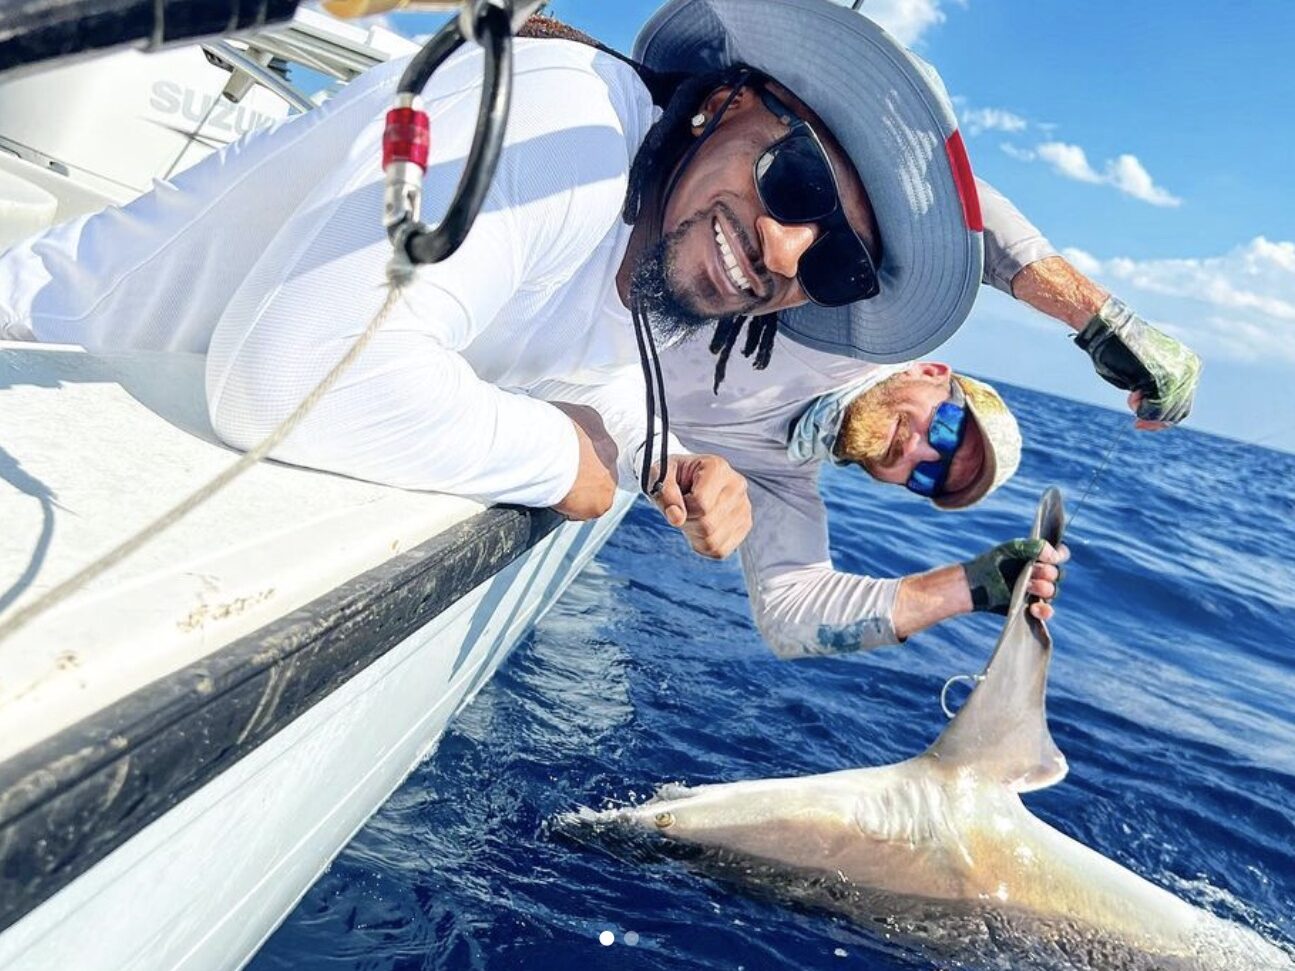 Captain and customer posing alongside boat after catching a shark on a fishing charter in Florida, emphasizing catch and release practices.